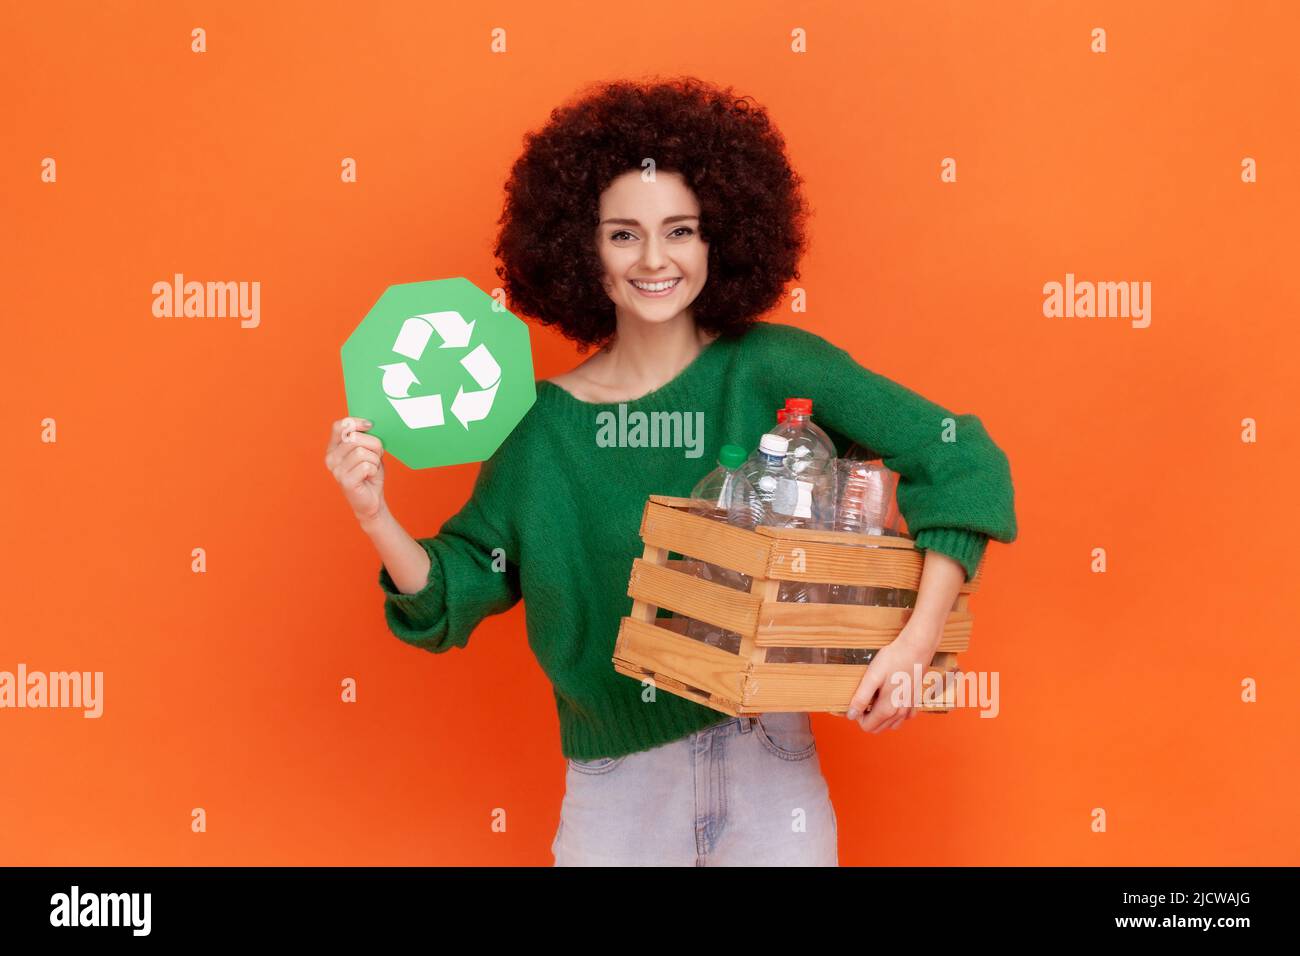 Smiling woman with Afro hairstyle wearing green casual style sweater holding box with plastic bottles and showing green recycling sign. Indoor studio shot isolated on orange background. Stock Photo